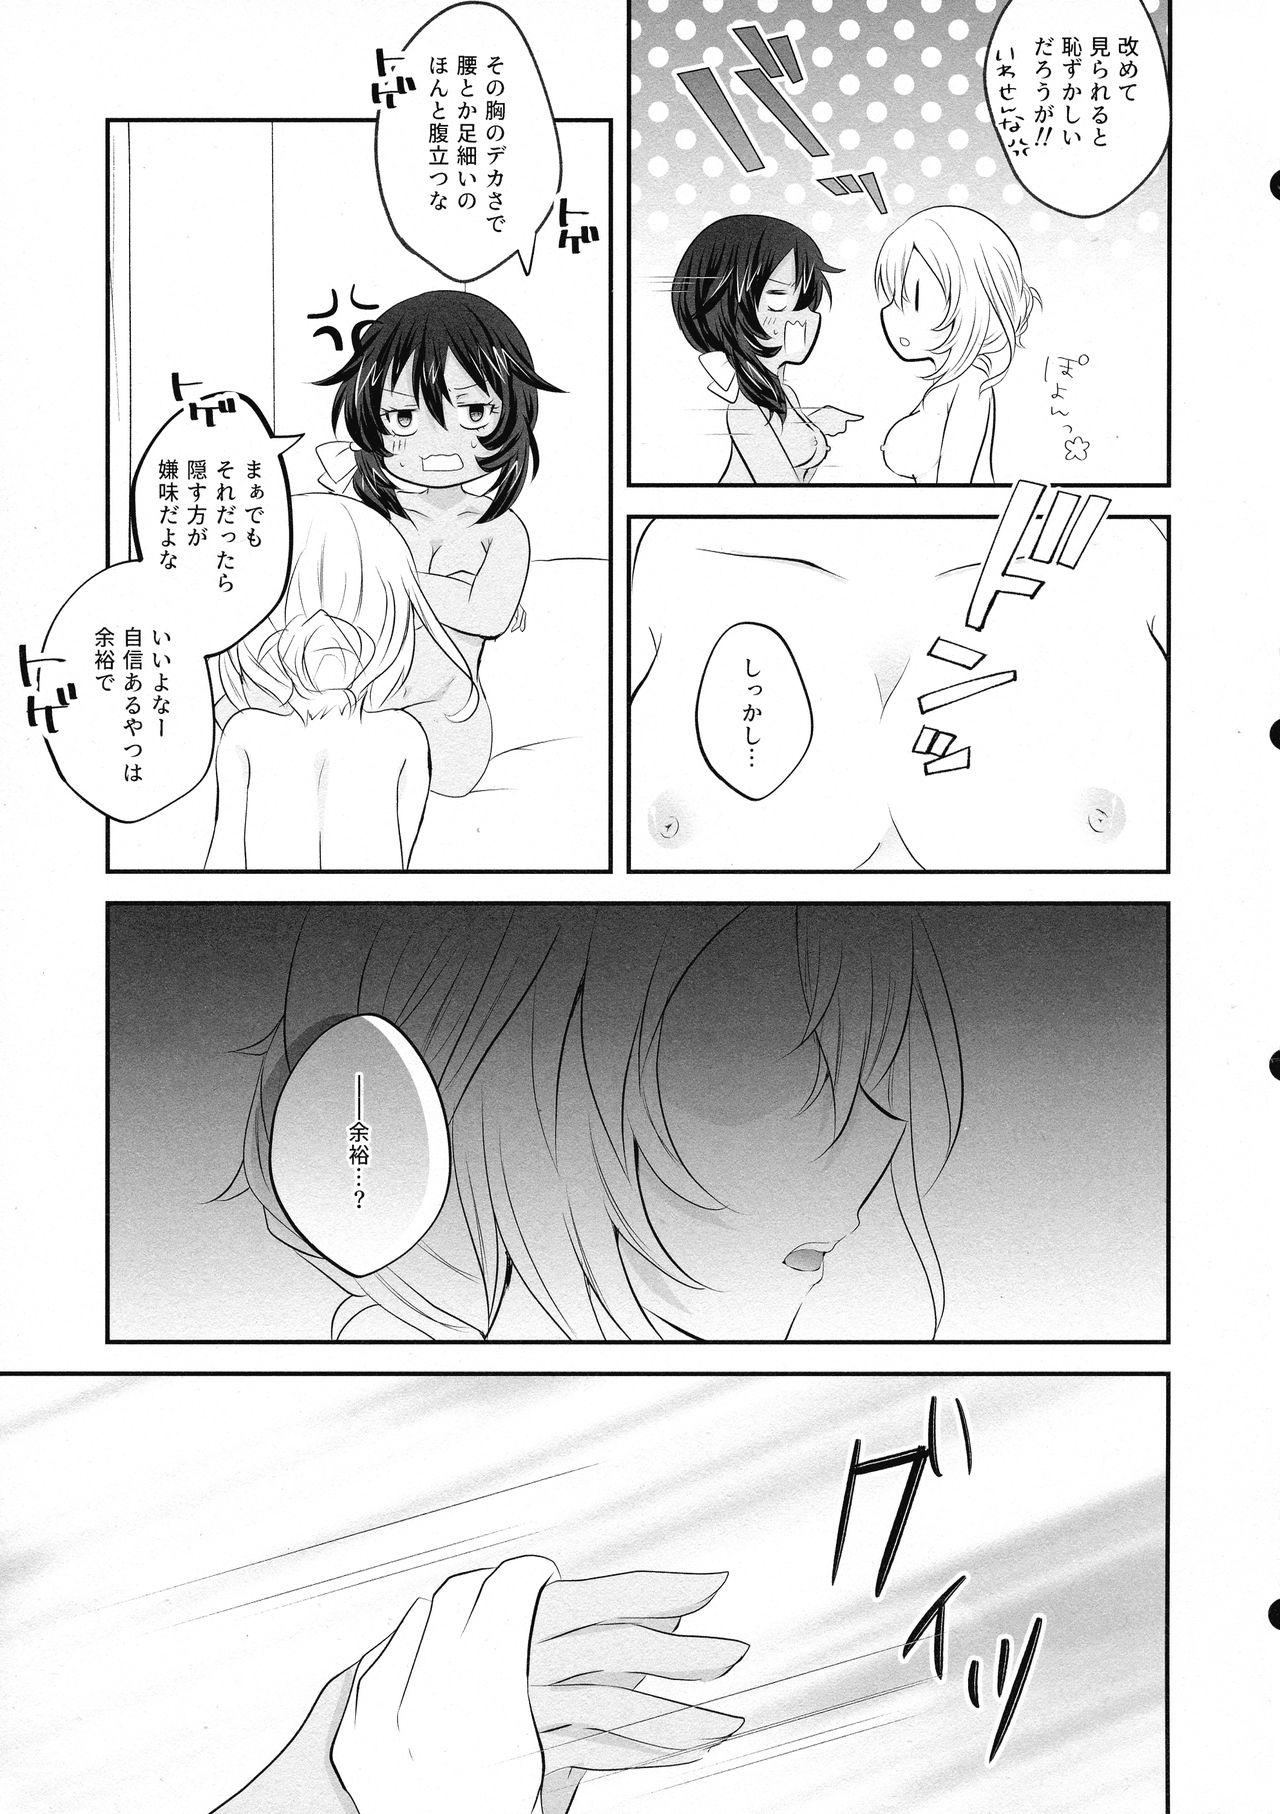 Love Moonlight Melody - Girls und panzer Outside - Page 11